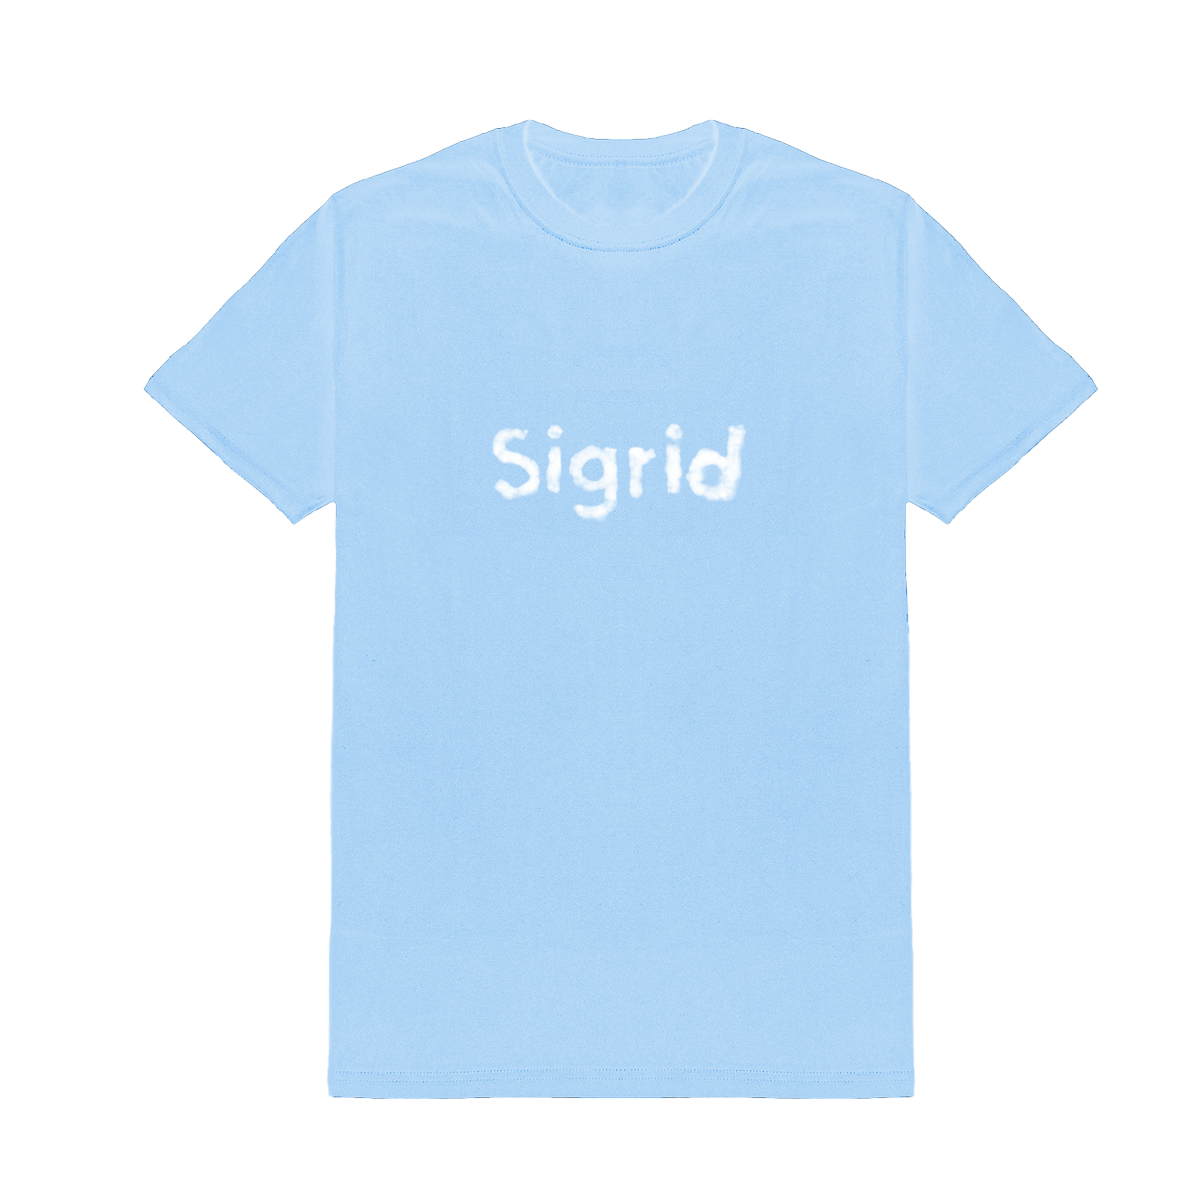 Sigrid - How To Let Go Cloud Tee